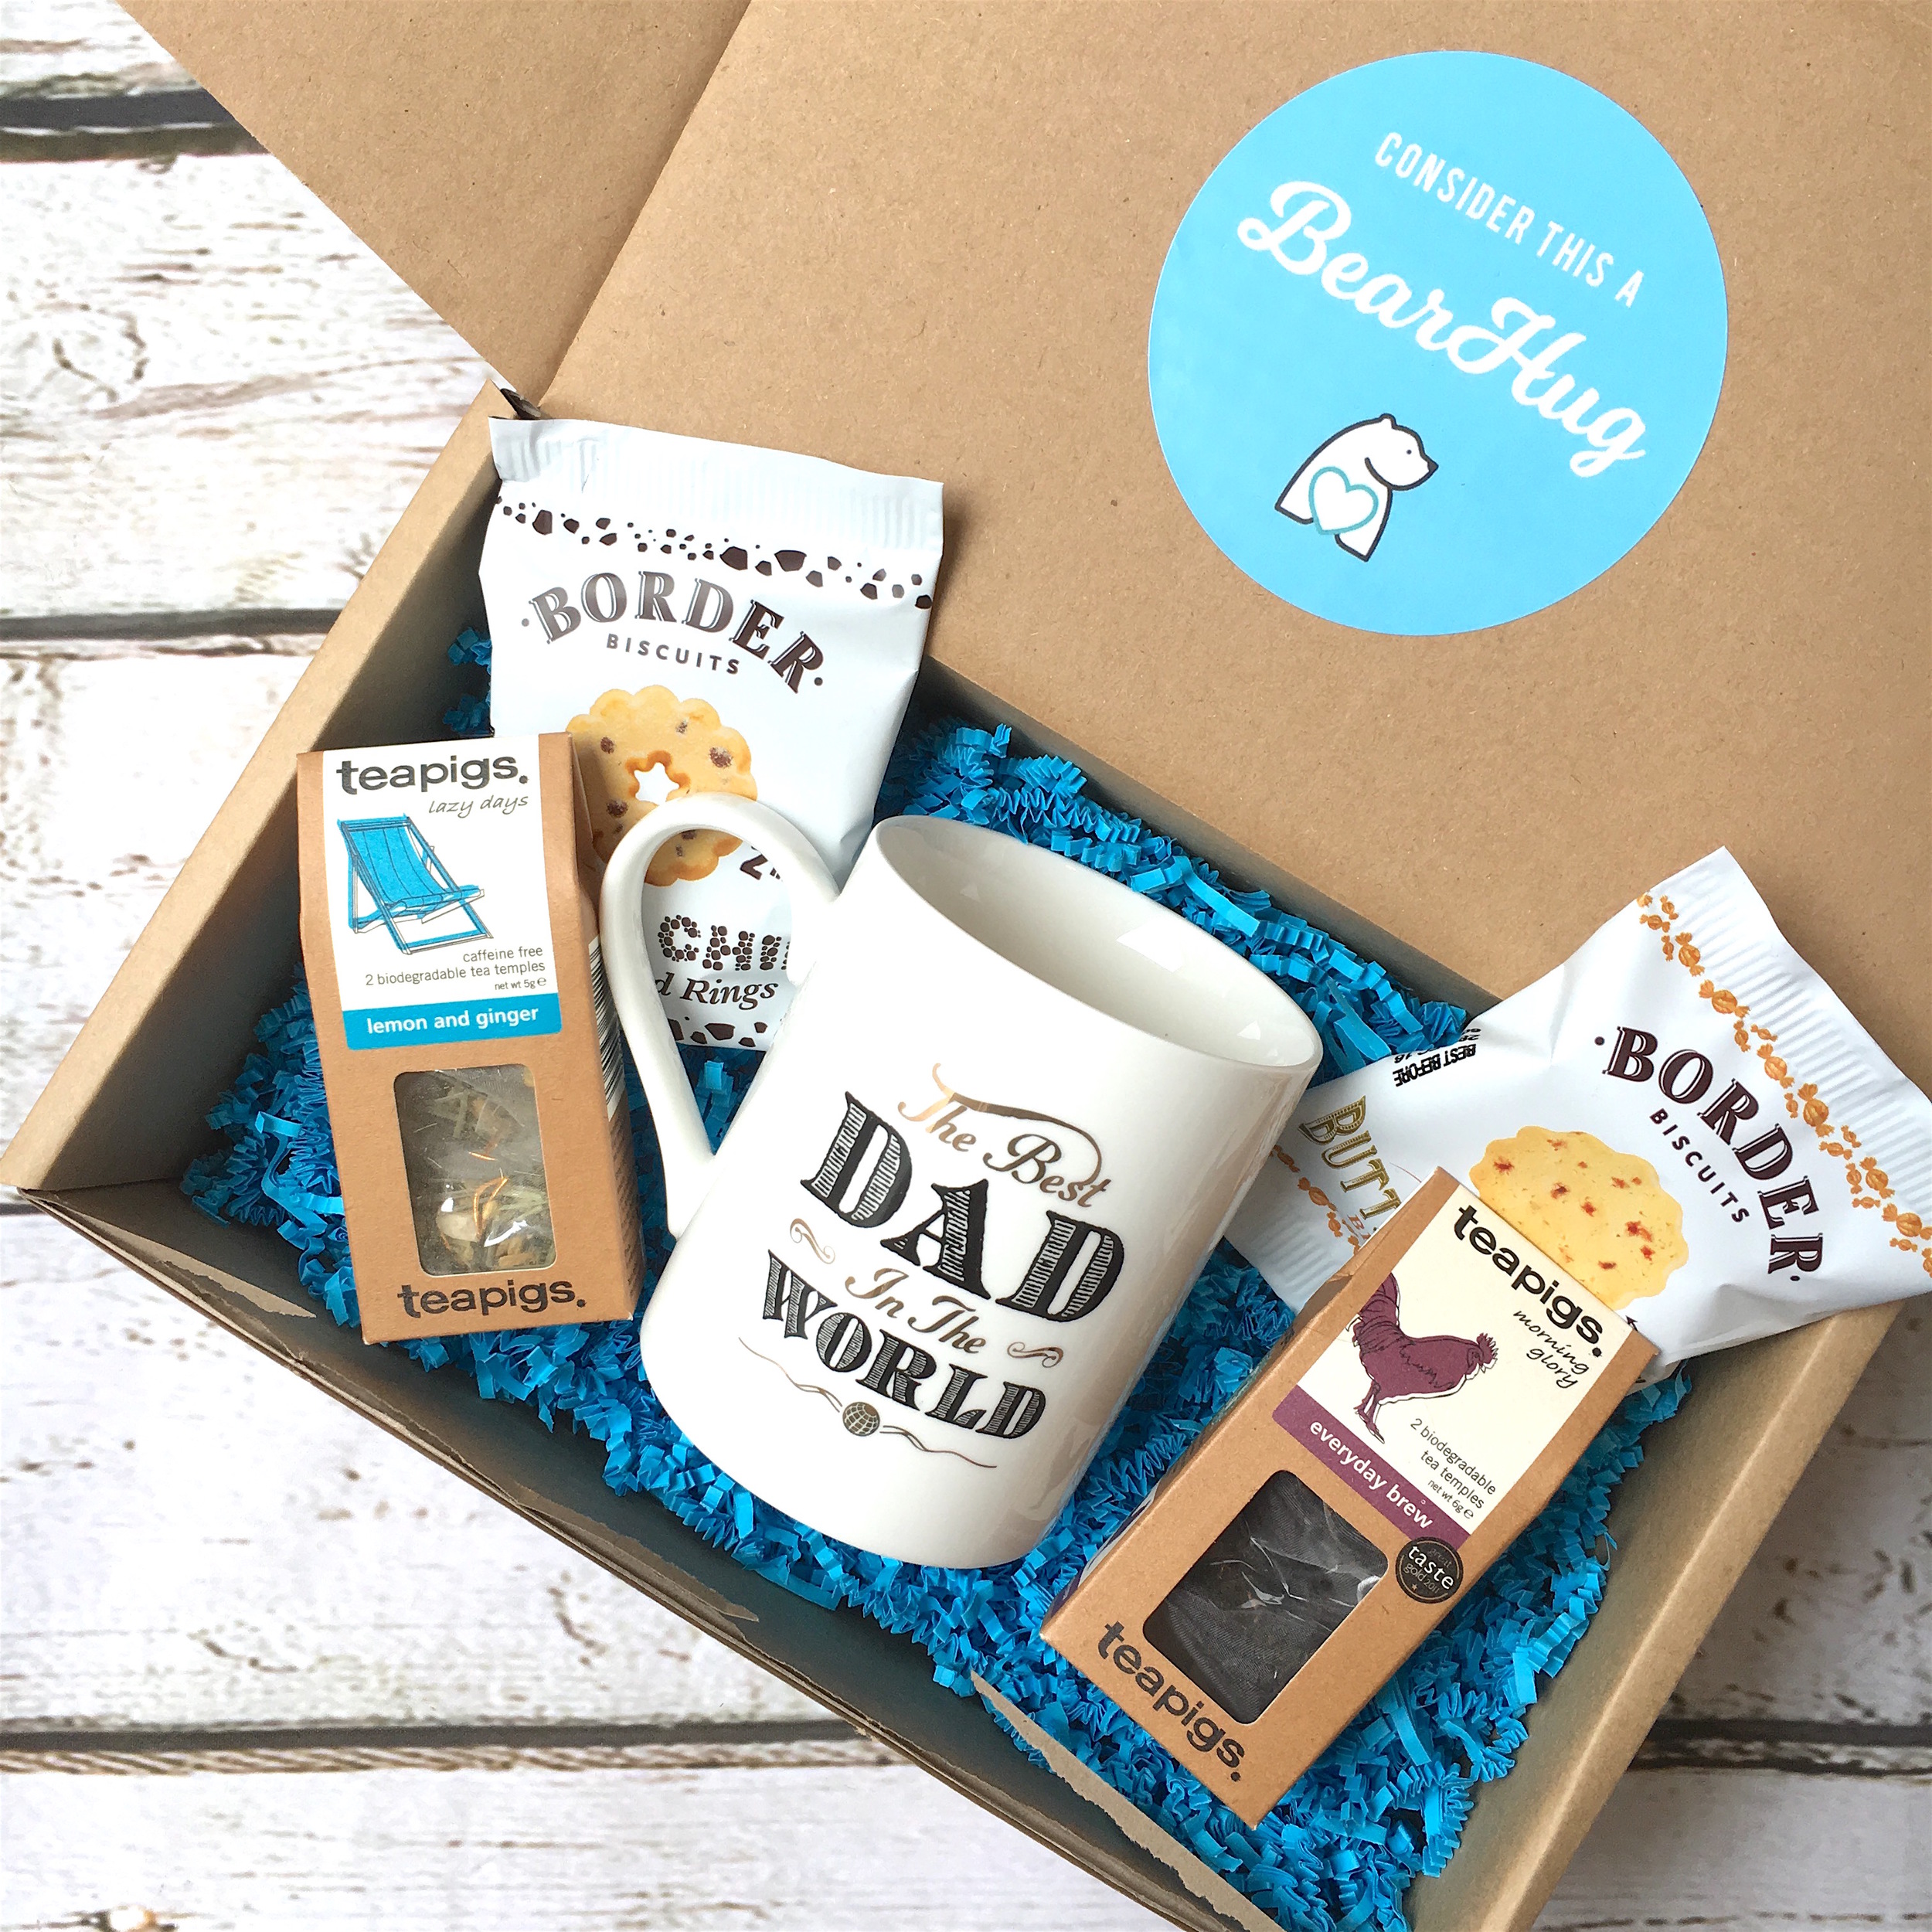 FATHER'S DAY GIFT BOXES NOW AVAILABLE TO ORDER — BearHugs Gifts Send